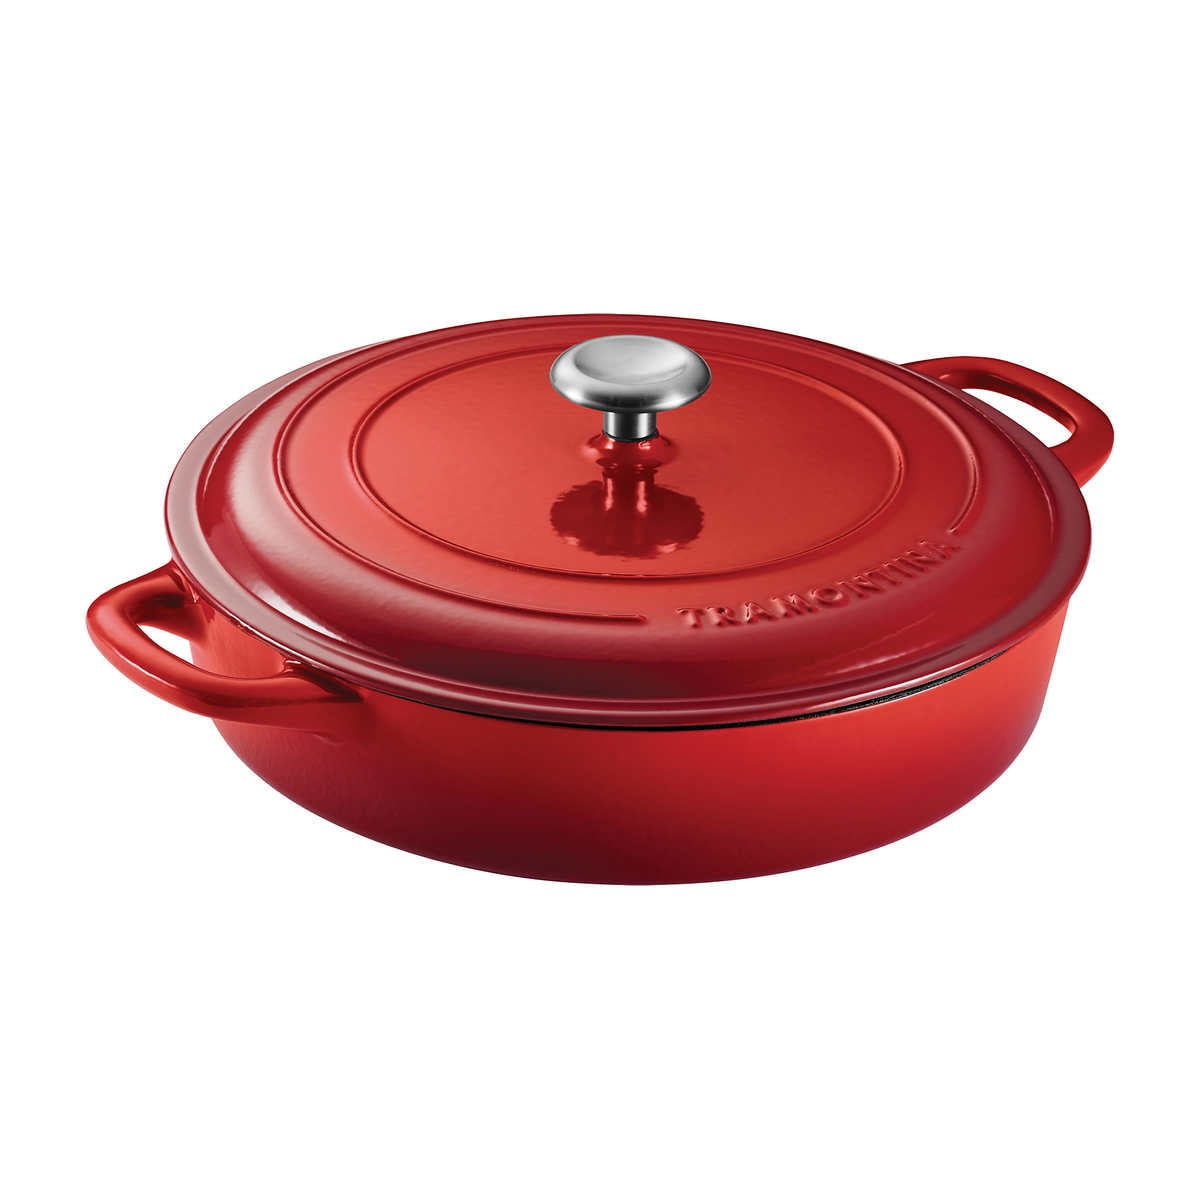 Oven-Safe Braising Pan 4 Qt Red Cast-Iron Round Tilting Skillet Lid Included 